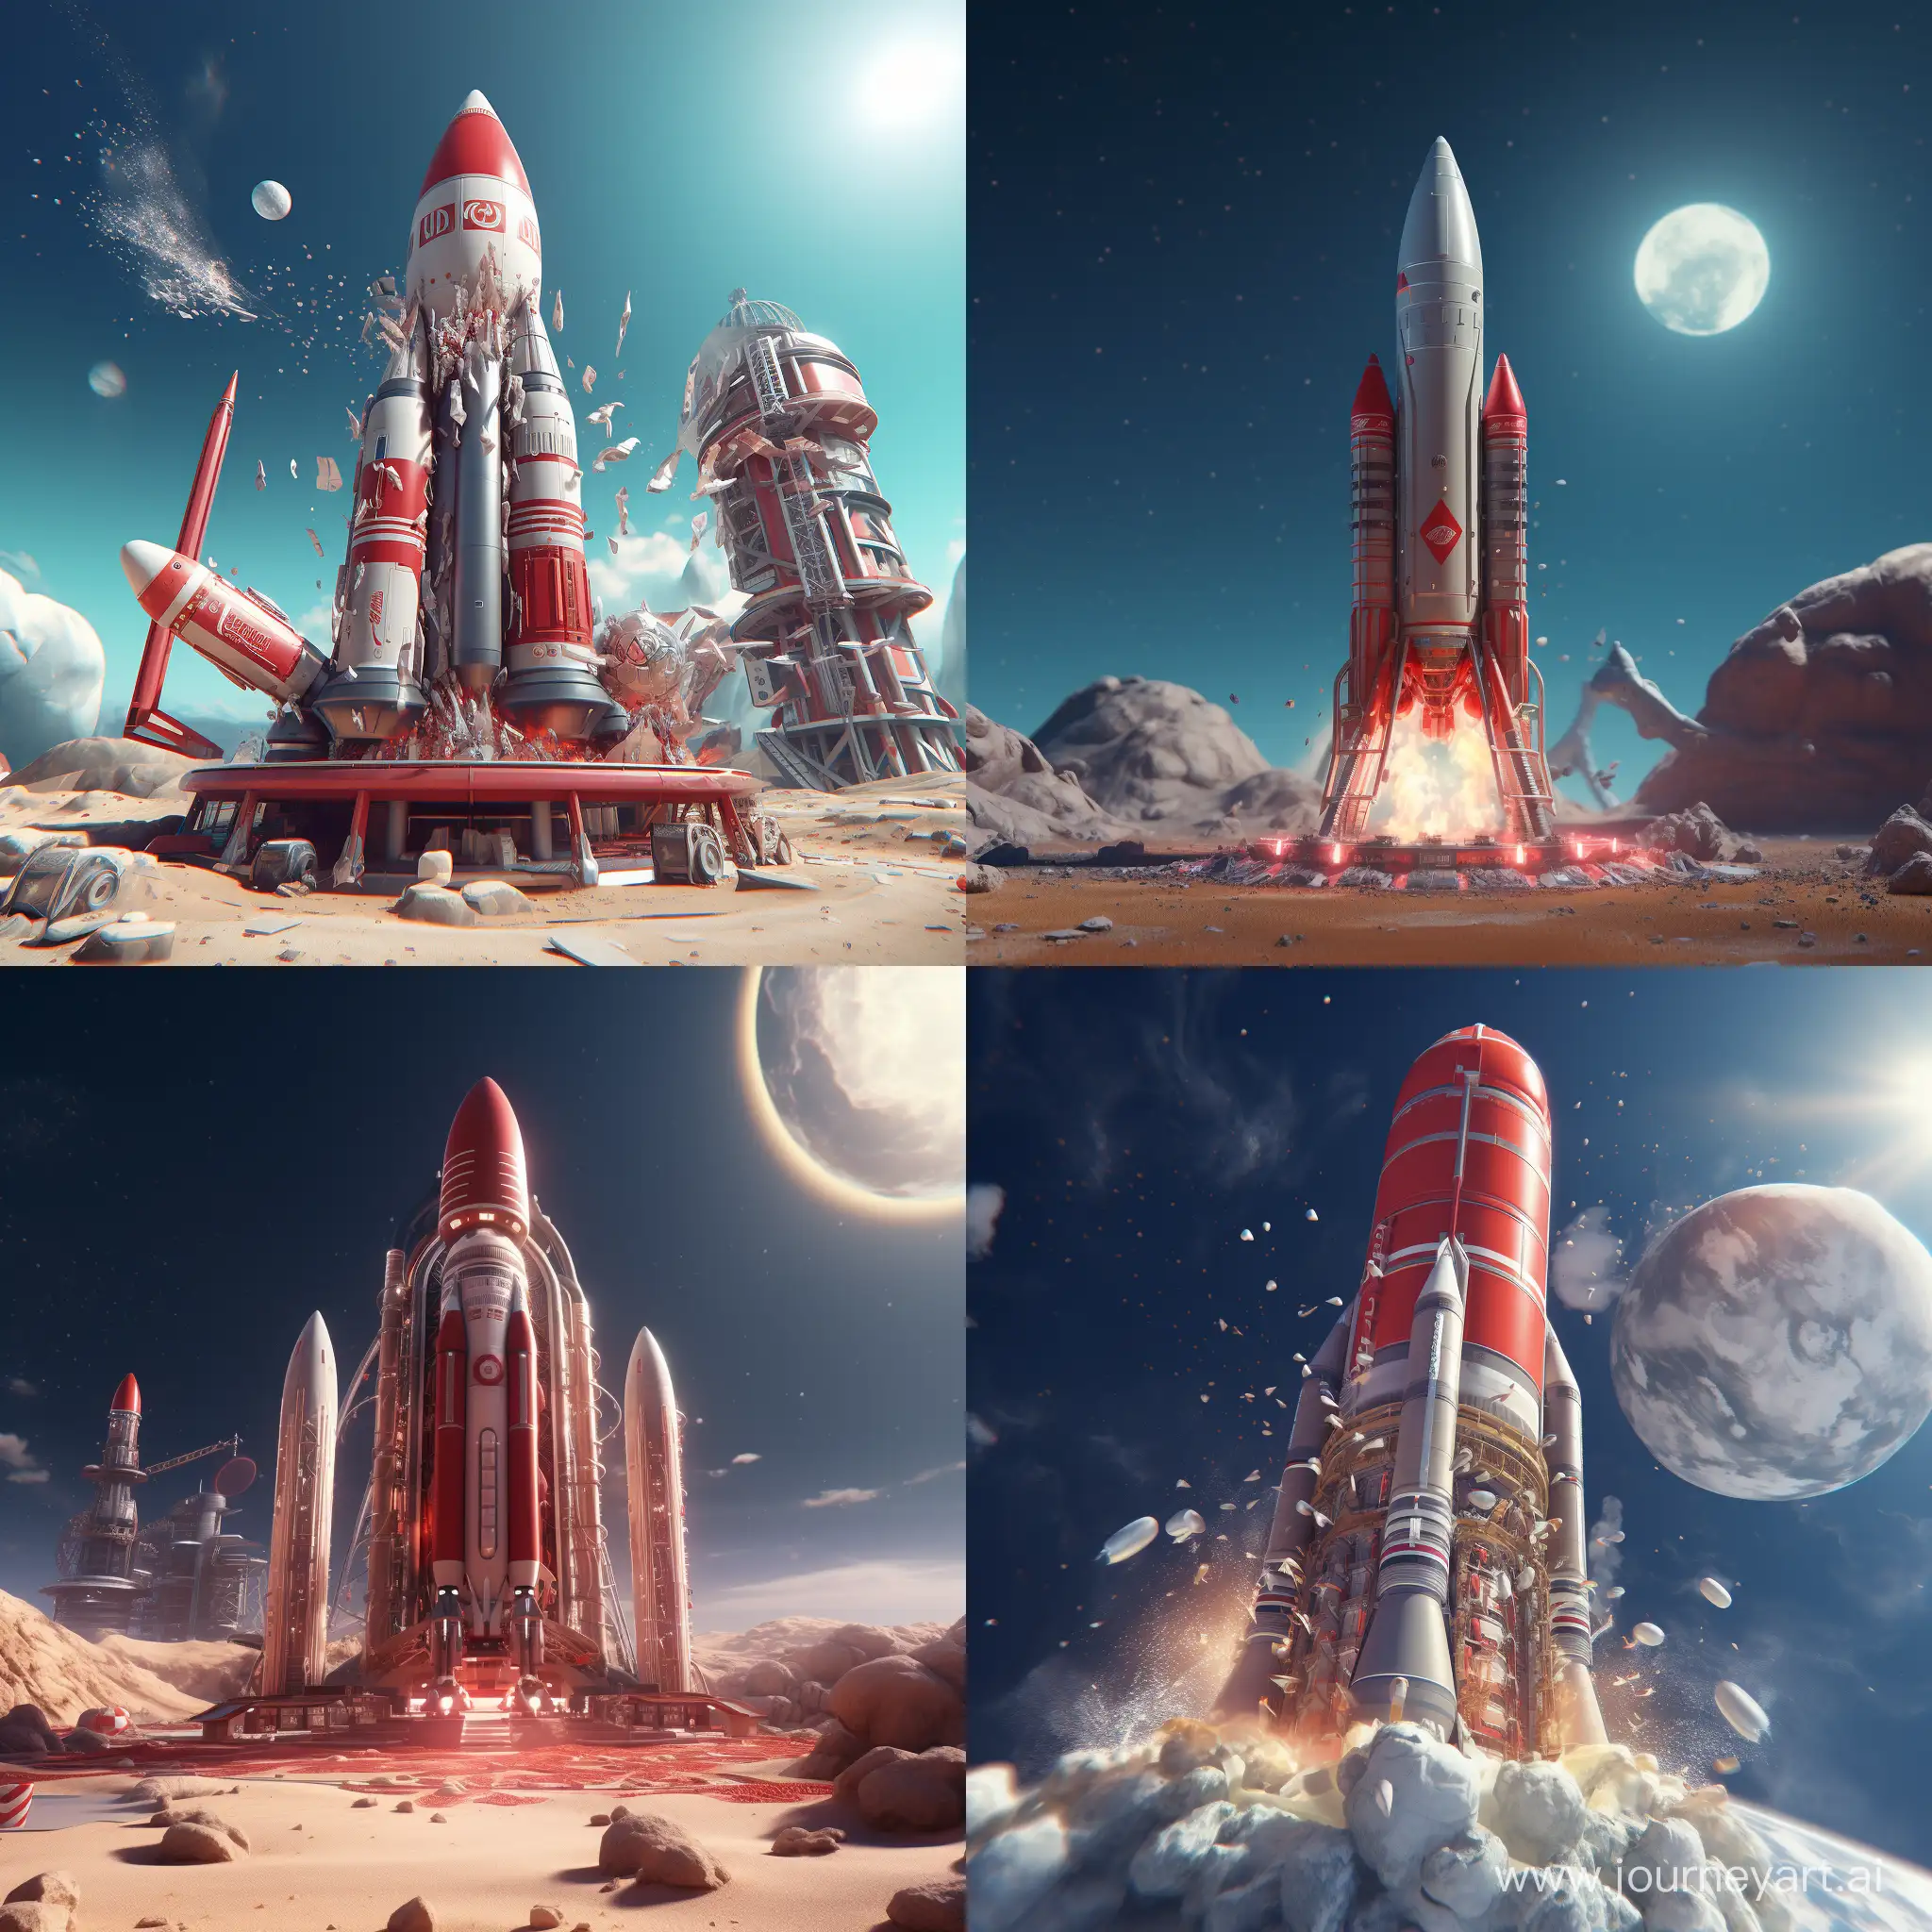 Fizzing-Excitement-CocaCola-and-Mentos-Rocket-in-Stunning-3D-Animation